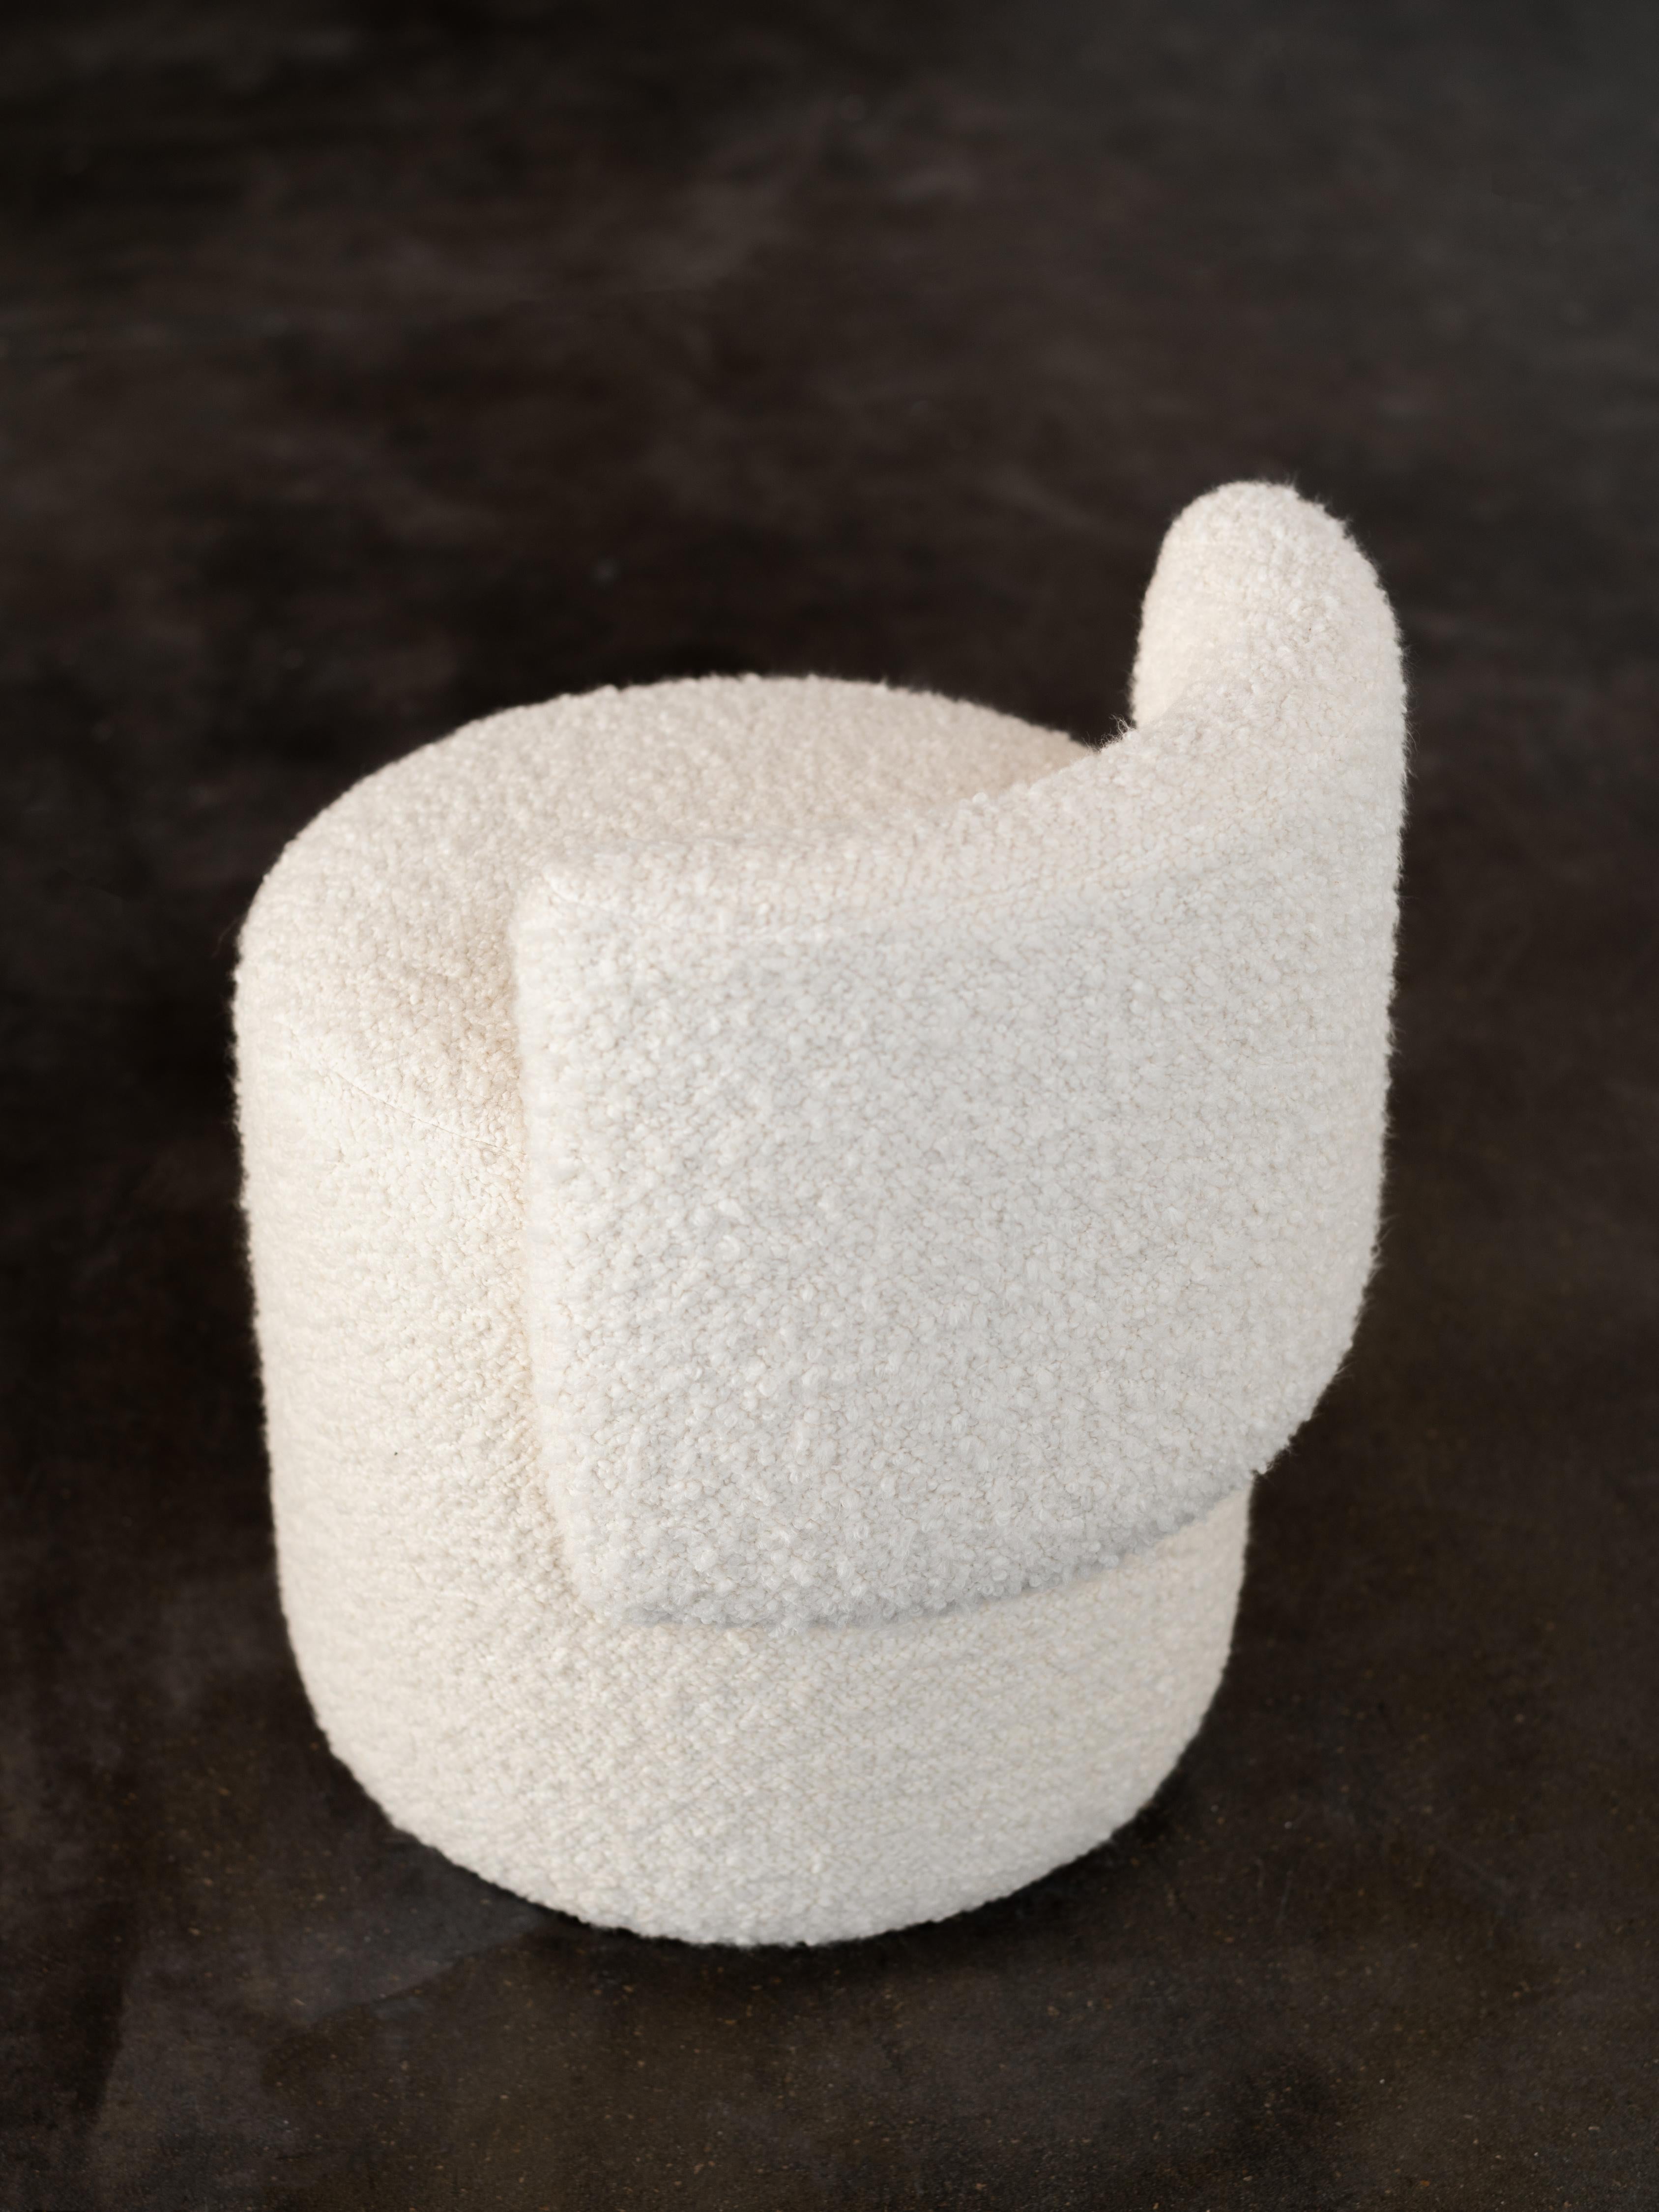 Grand Pouf, Modern Collection, Handcrafted in Portugal - Europe by GF Modern.

A comfy pouf stool with a luxurious touch. Upholstered in white cotton bouclé fabric, Flox stands out on its own in any room interior. Destined to beautify in any of its